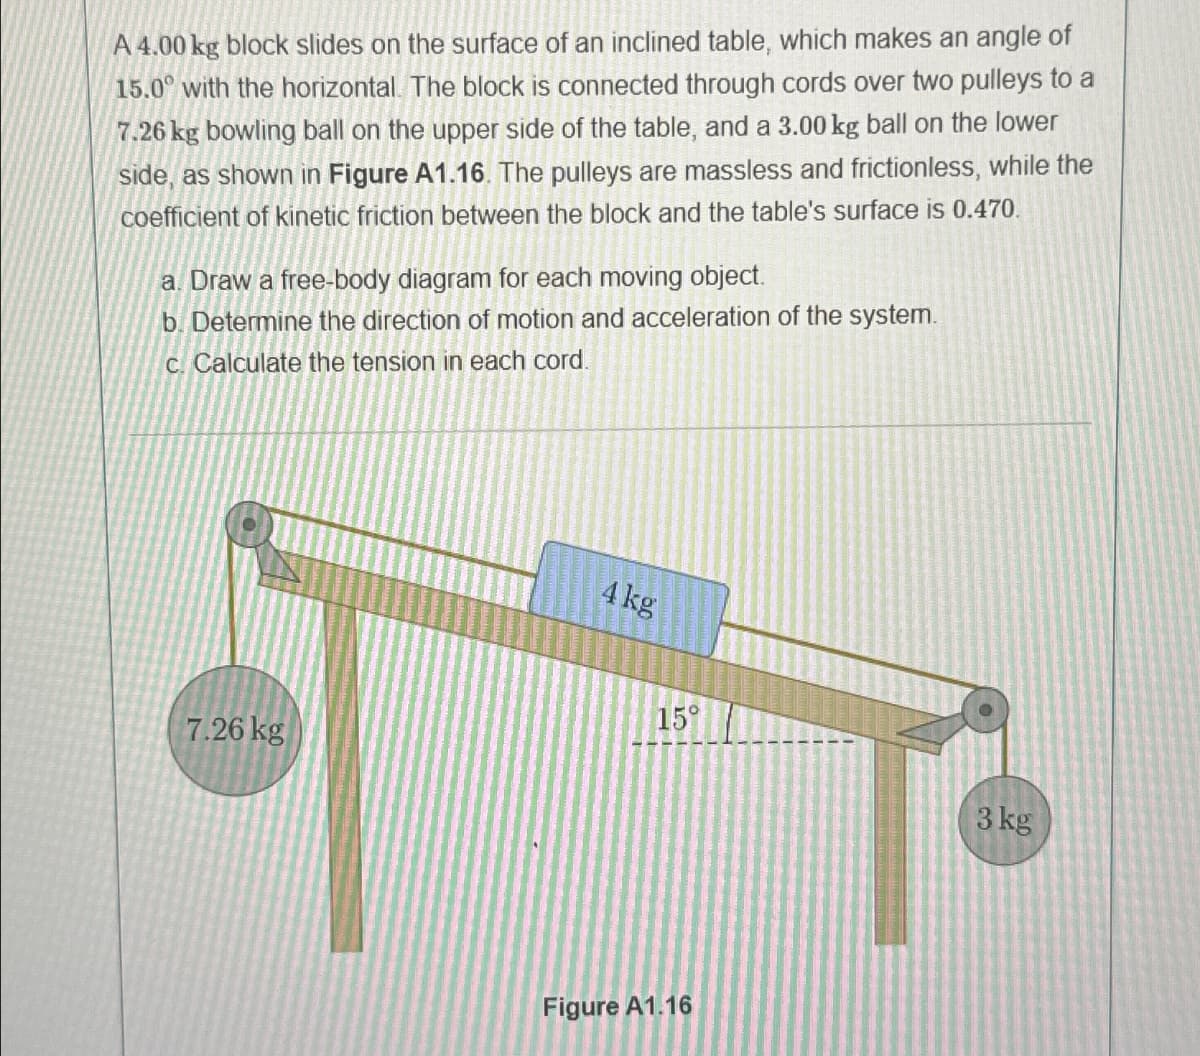 A 4.00 kg block slides on the surface of an inclined table, which makes an angle of
15.0° with the horizontal. The block is connected through cords over two pulleys to a
7.26 kg bowling ball on the upper side of the table, and a 3.00 kg ball on the lower
side, as shown in Figure A1.16. The pulleys are massless and frictionless, while the
coefficient of kinetic friction between the block and the table's surface is 0.470.
a. Draw a free-body diagram for each moving object.
b. Determine the direction of motion and acceleration of the system.
c. Calculate the tension in each cord.
7.26 kg
4 kg
15°
3 kg
Figure A1.16